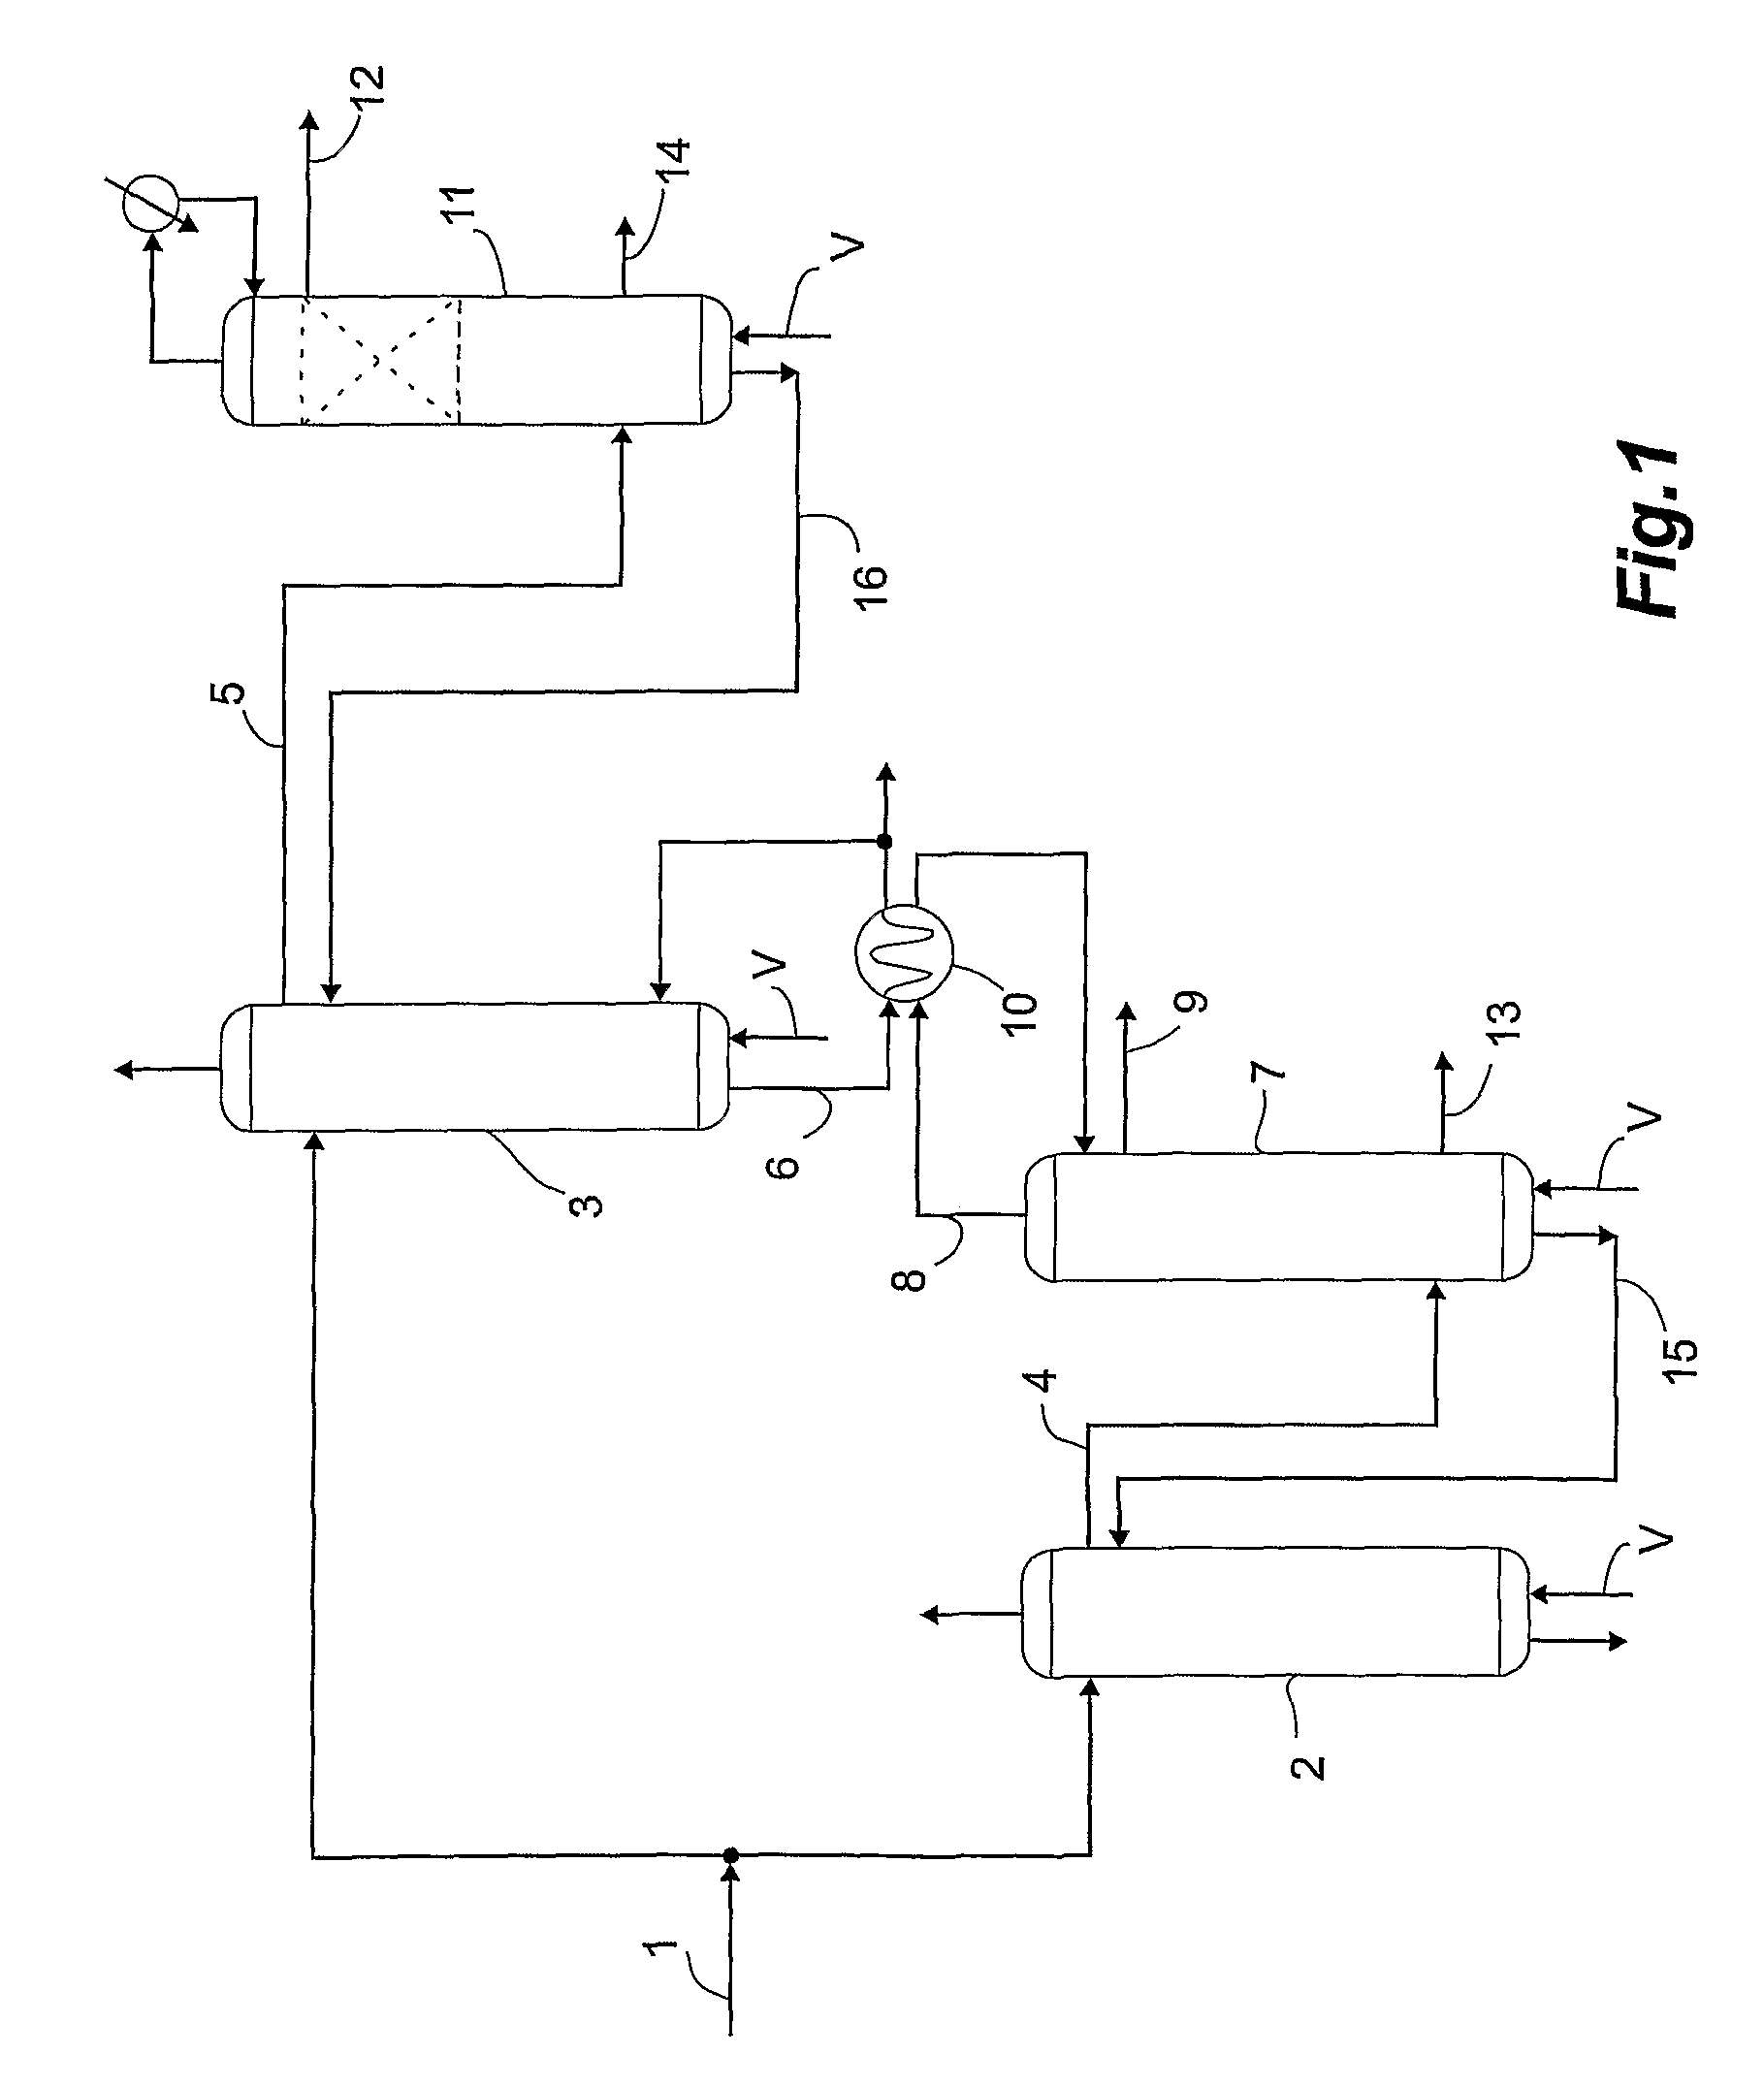 Process and system for producing alcohol by split-feed distillation